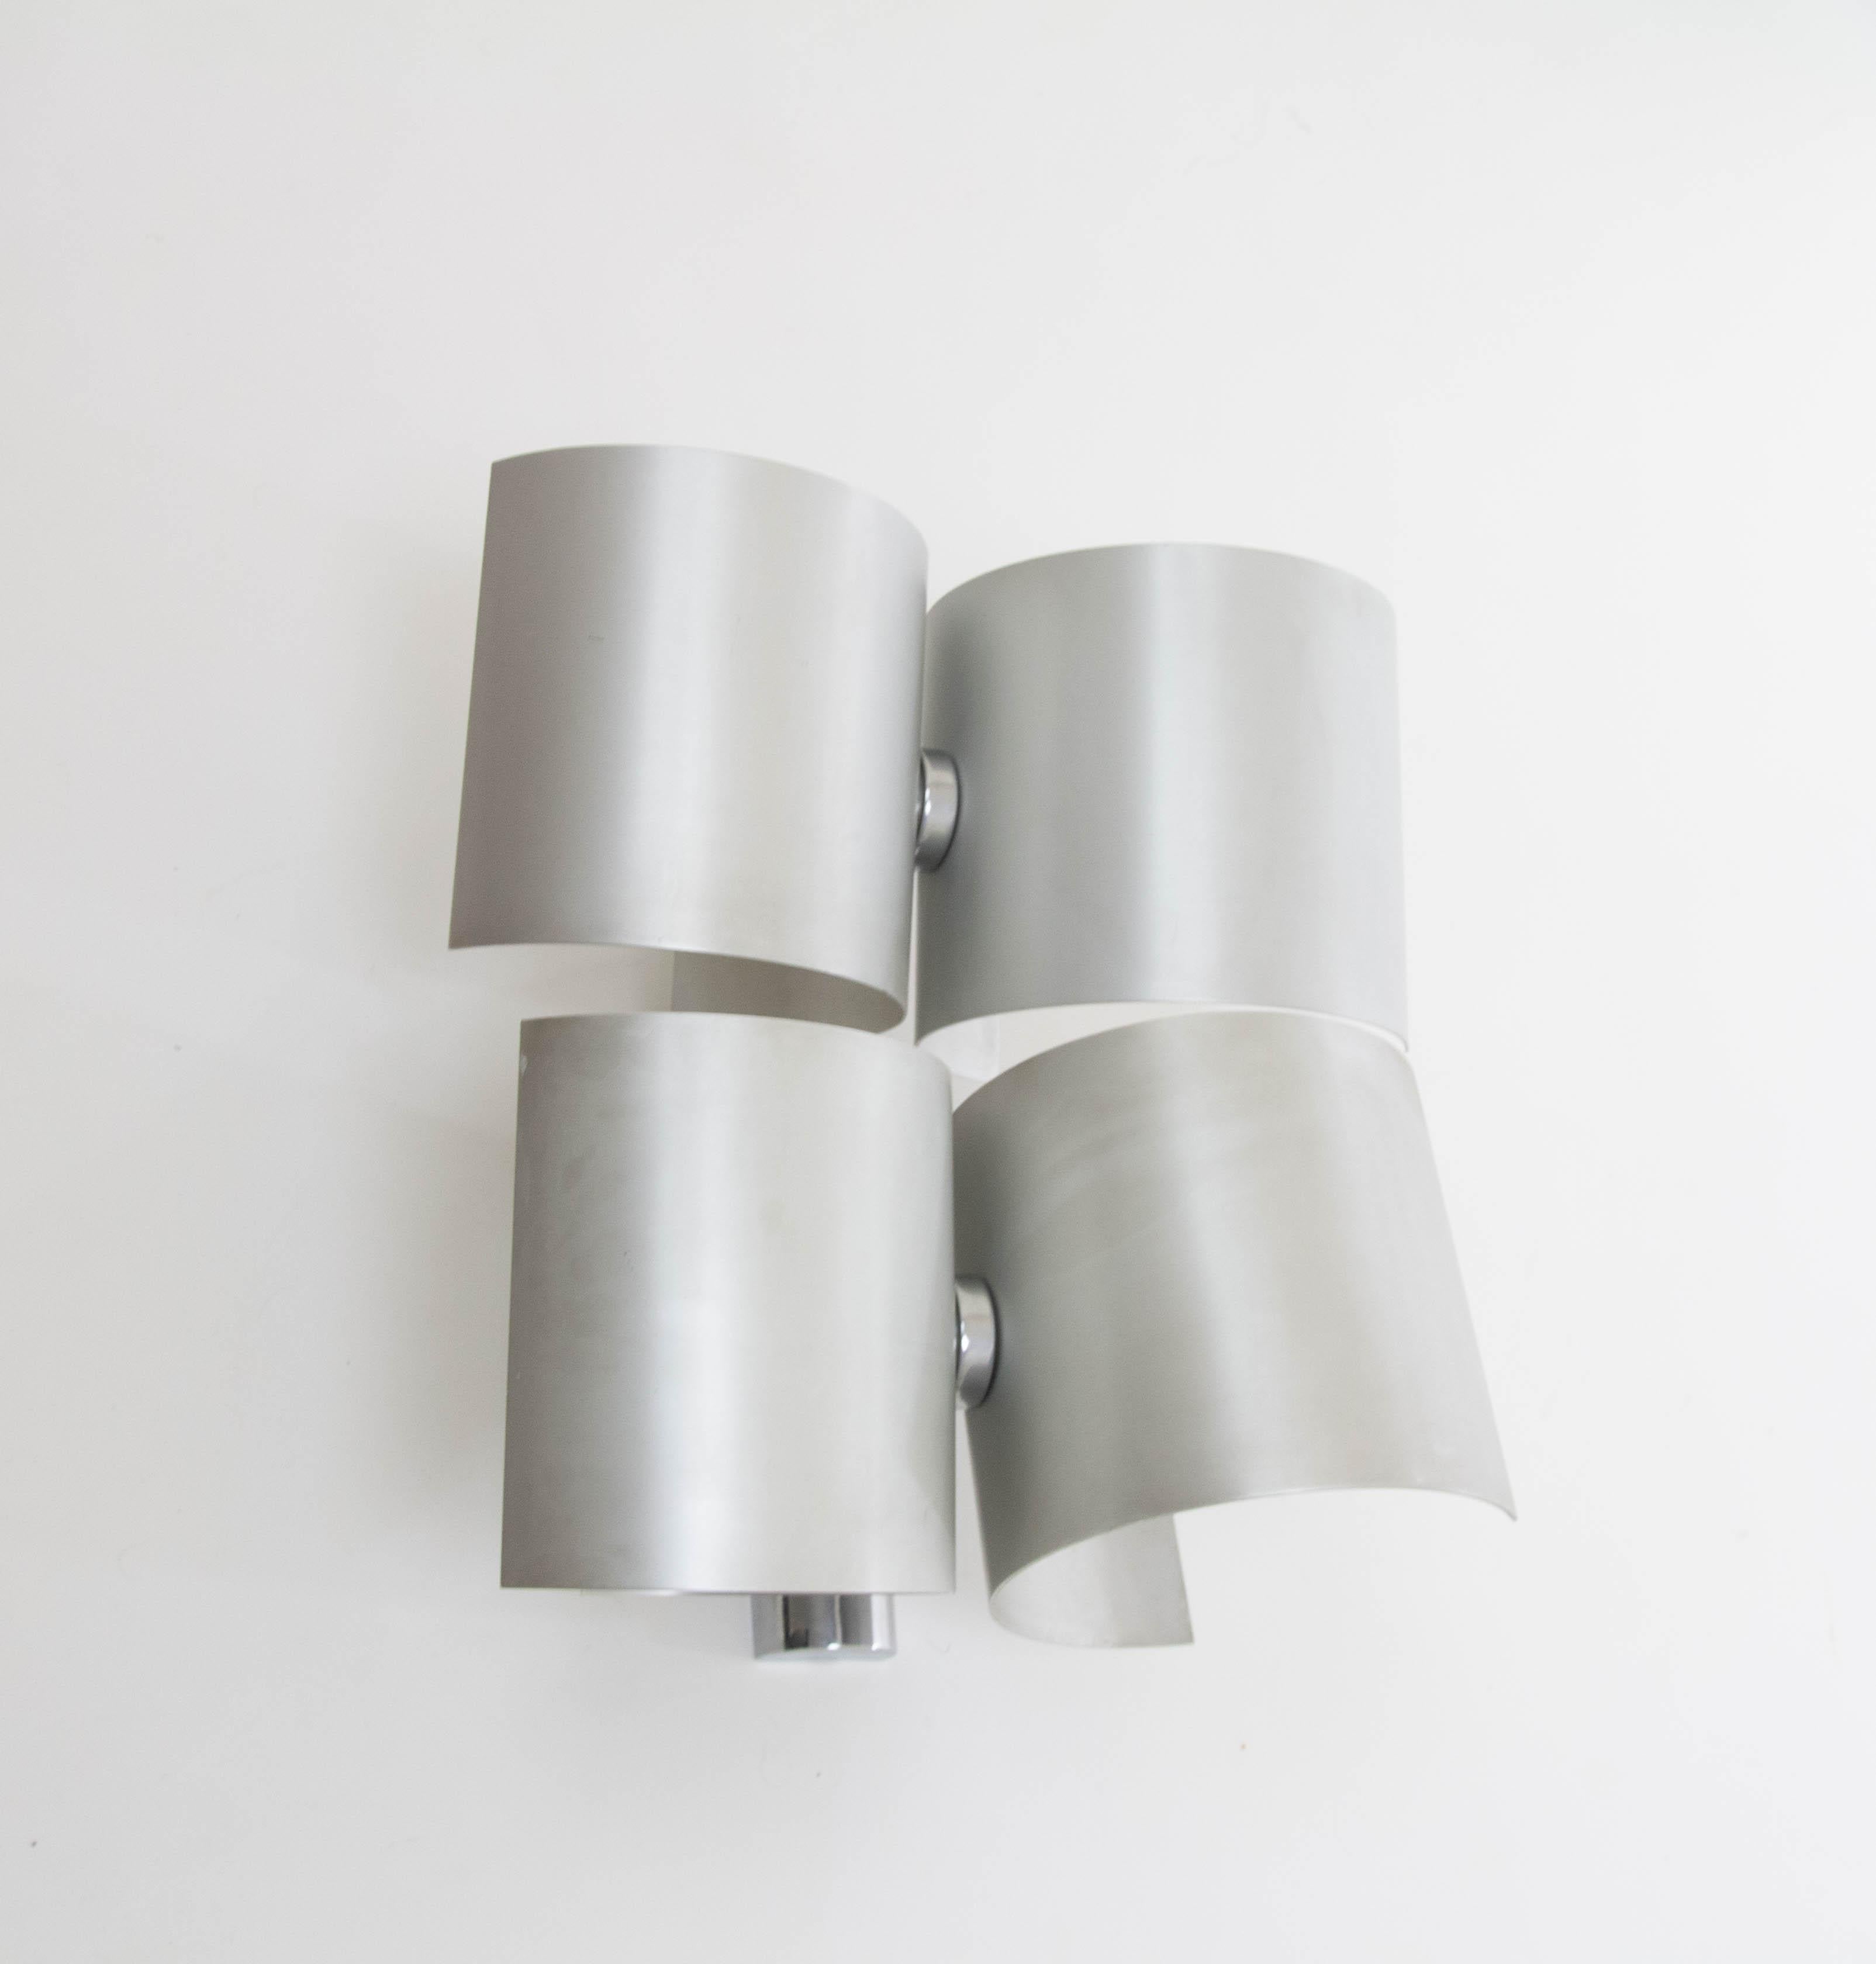 Wall lamp produced by Nucleo Sormani in the 1970s.

The lamp consists of four -similar but not the same- curved aluminum parts, each with a light bulb socket (E14). Each part can rotate independently of the other parts, thus offering a wide range of